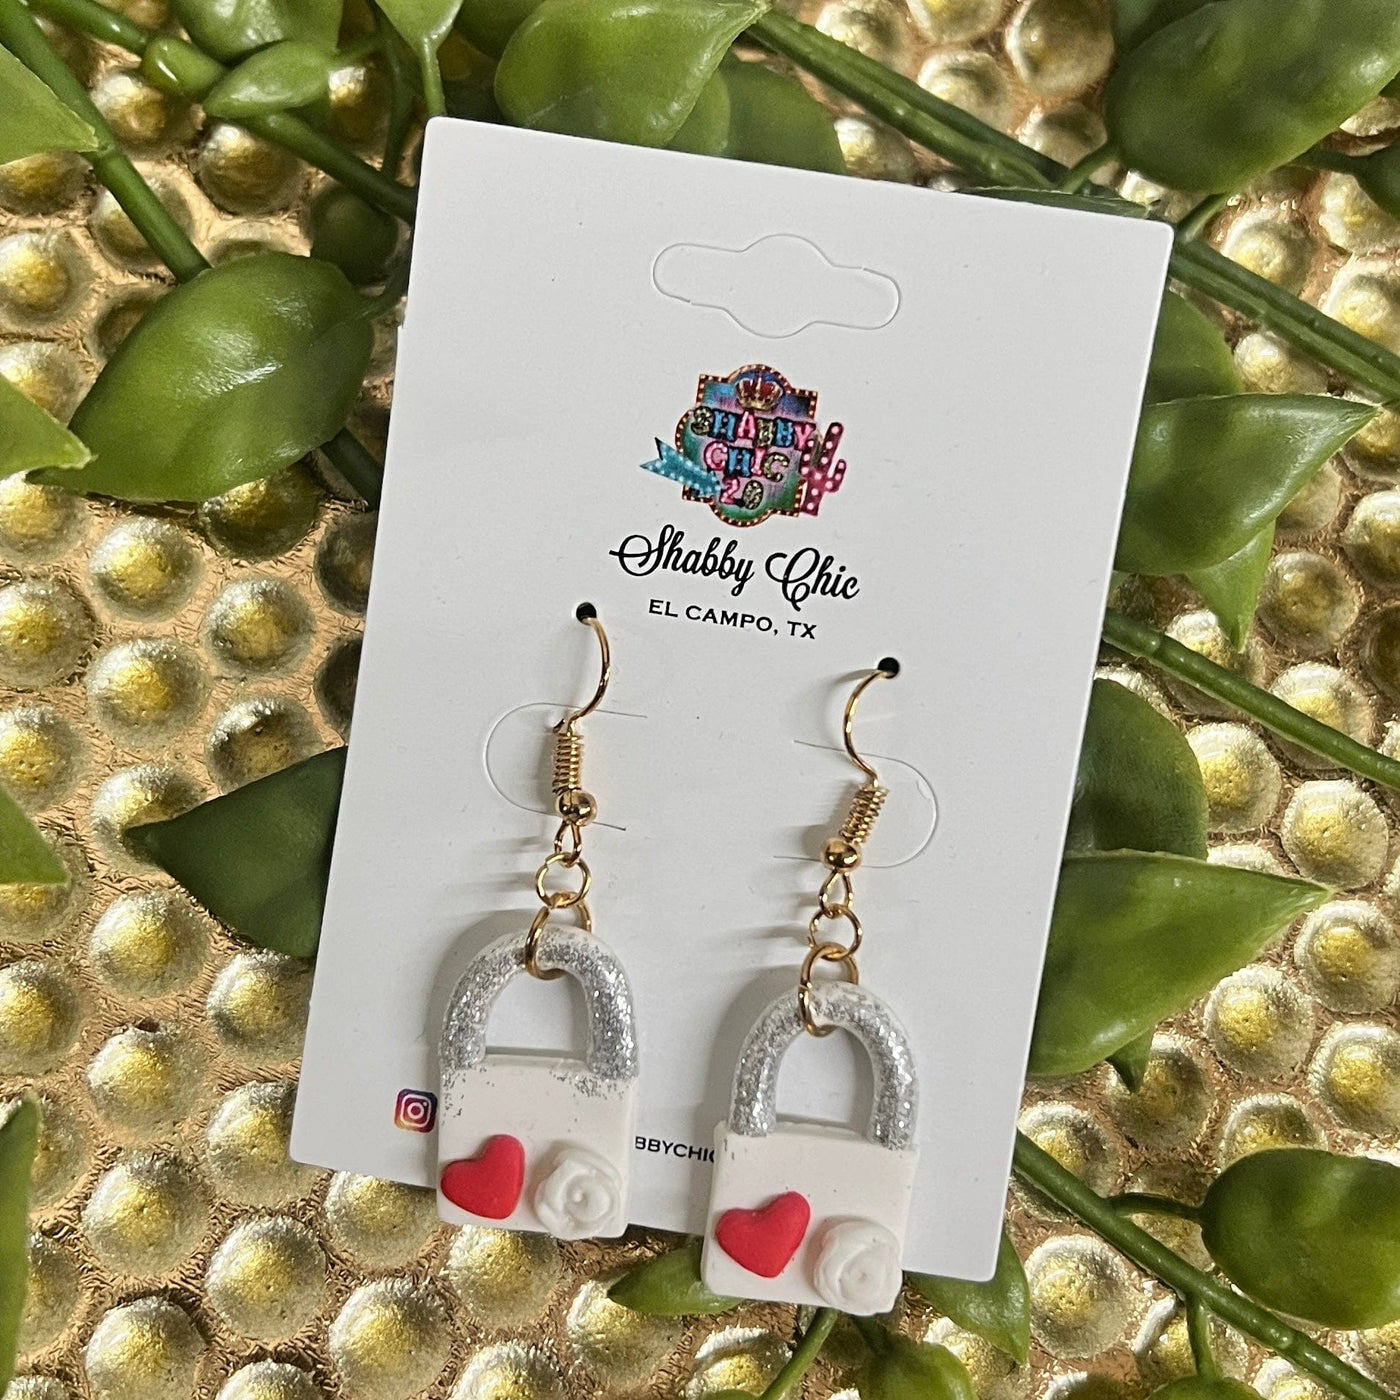 Clay Locked in Love Earrings Shabby Chic Boutique and Tanning Salon